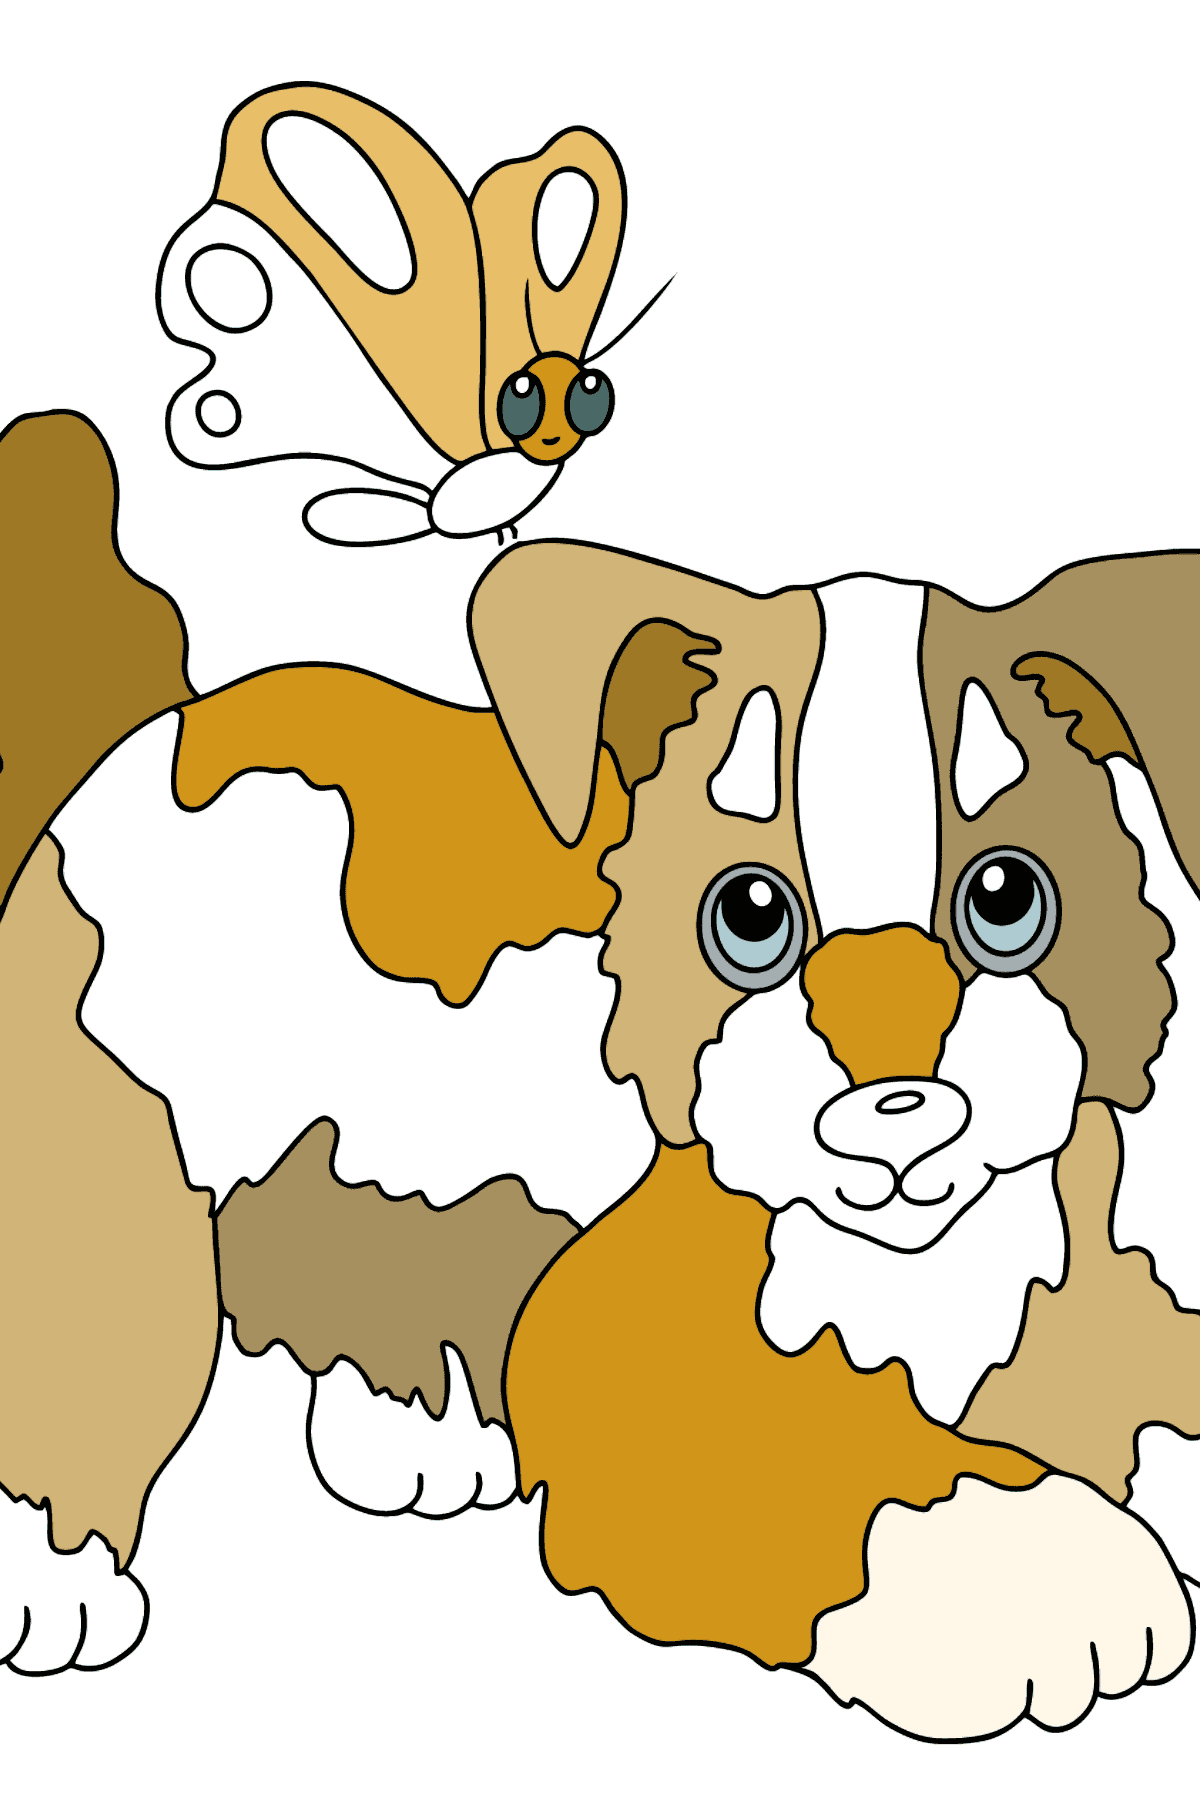 Coloring Page - A Dog is Playing with a Butterfly - Coloring Pages for Kids